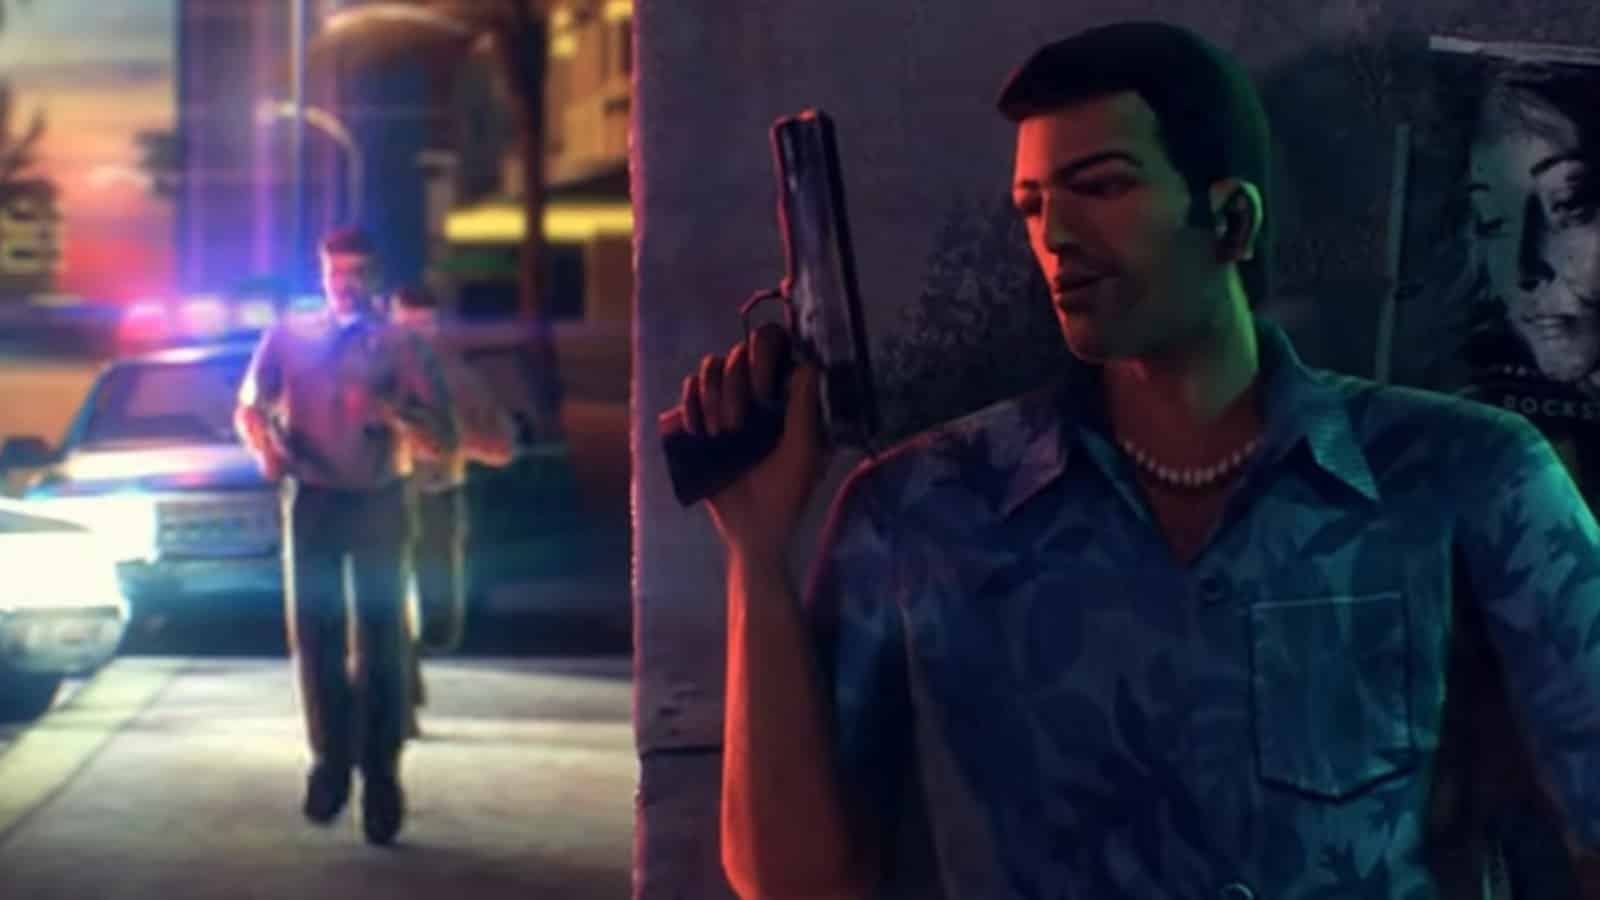 GTA Trilogy Remaster has fans divided over graphics on Unreal